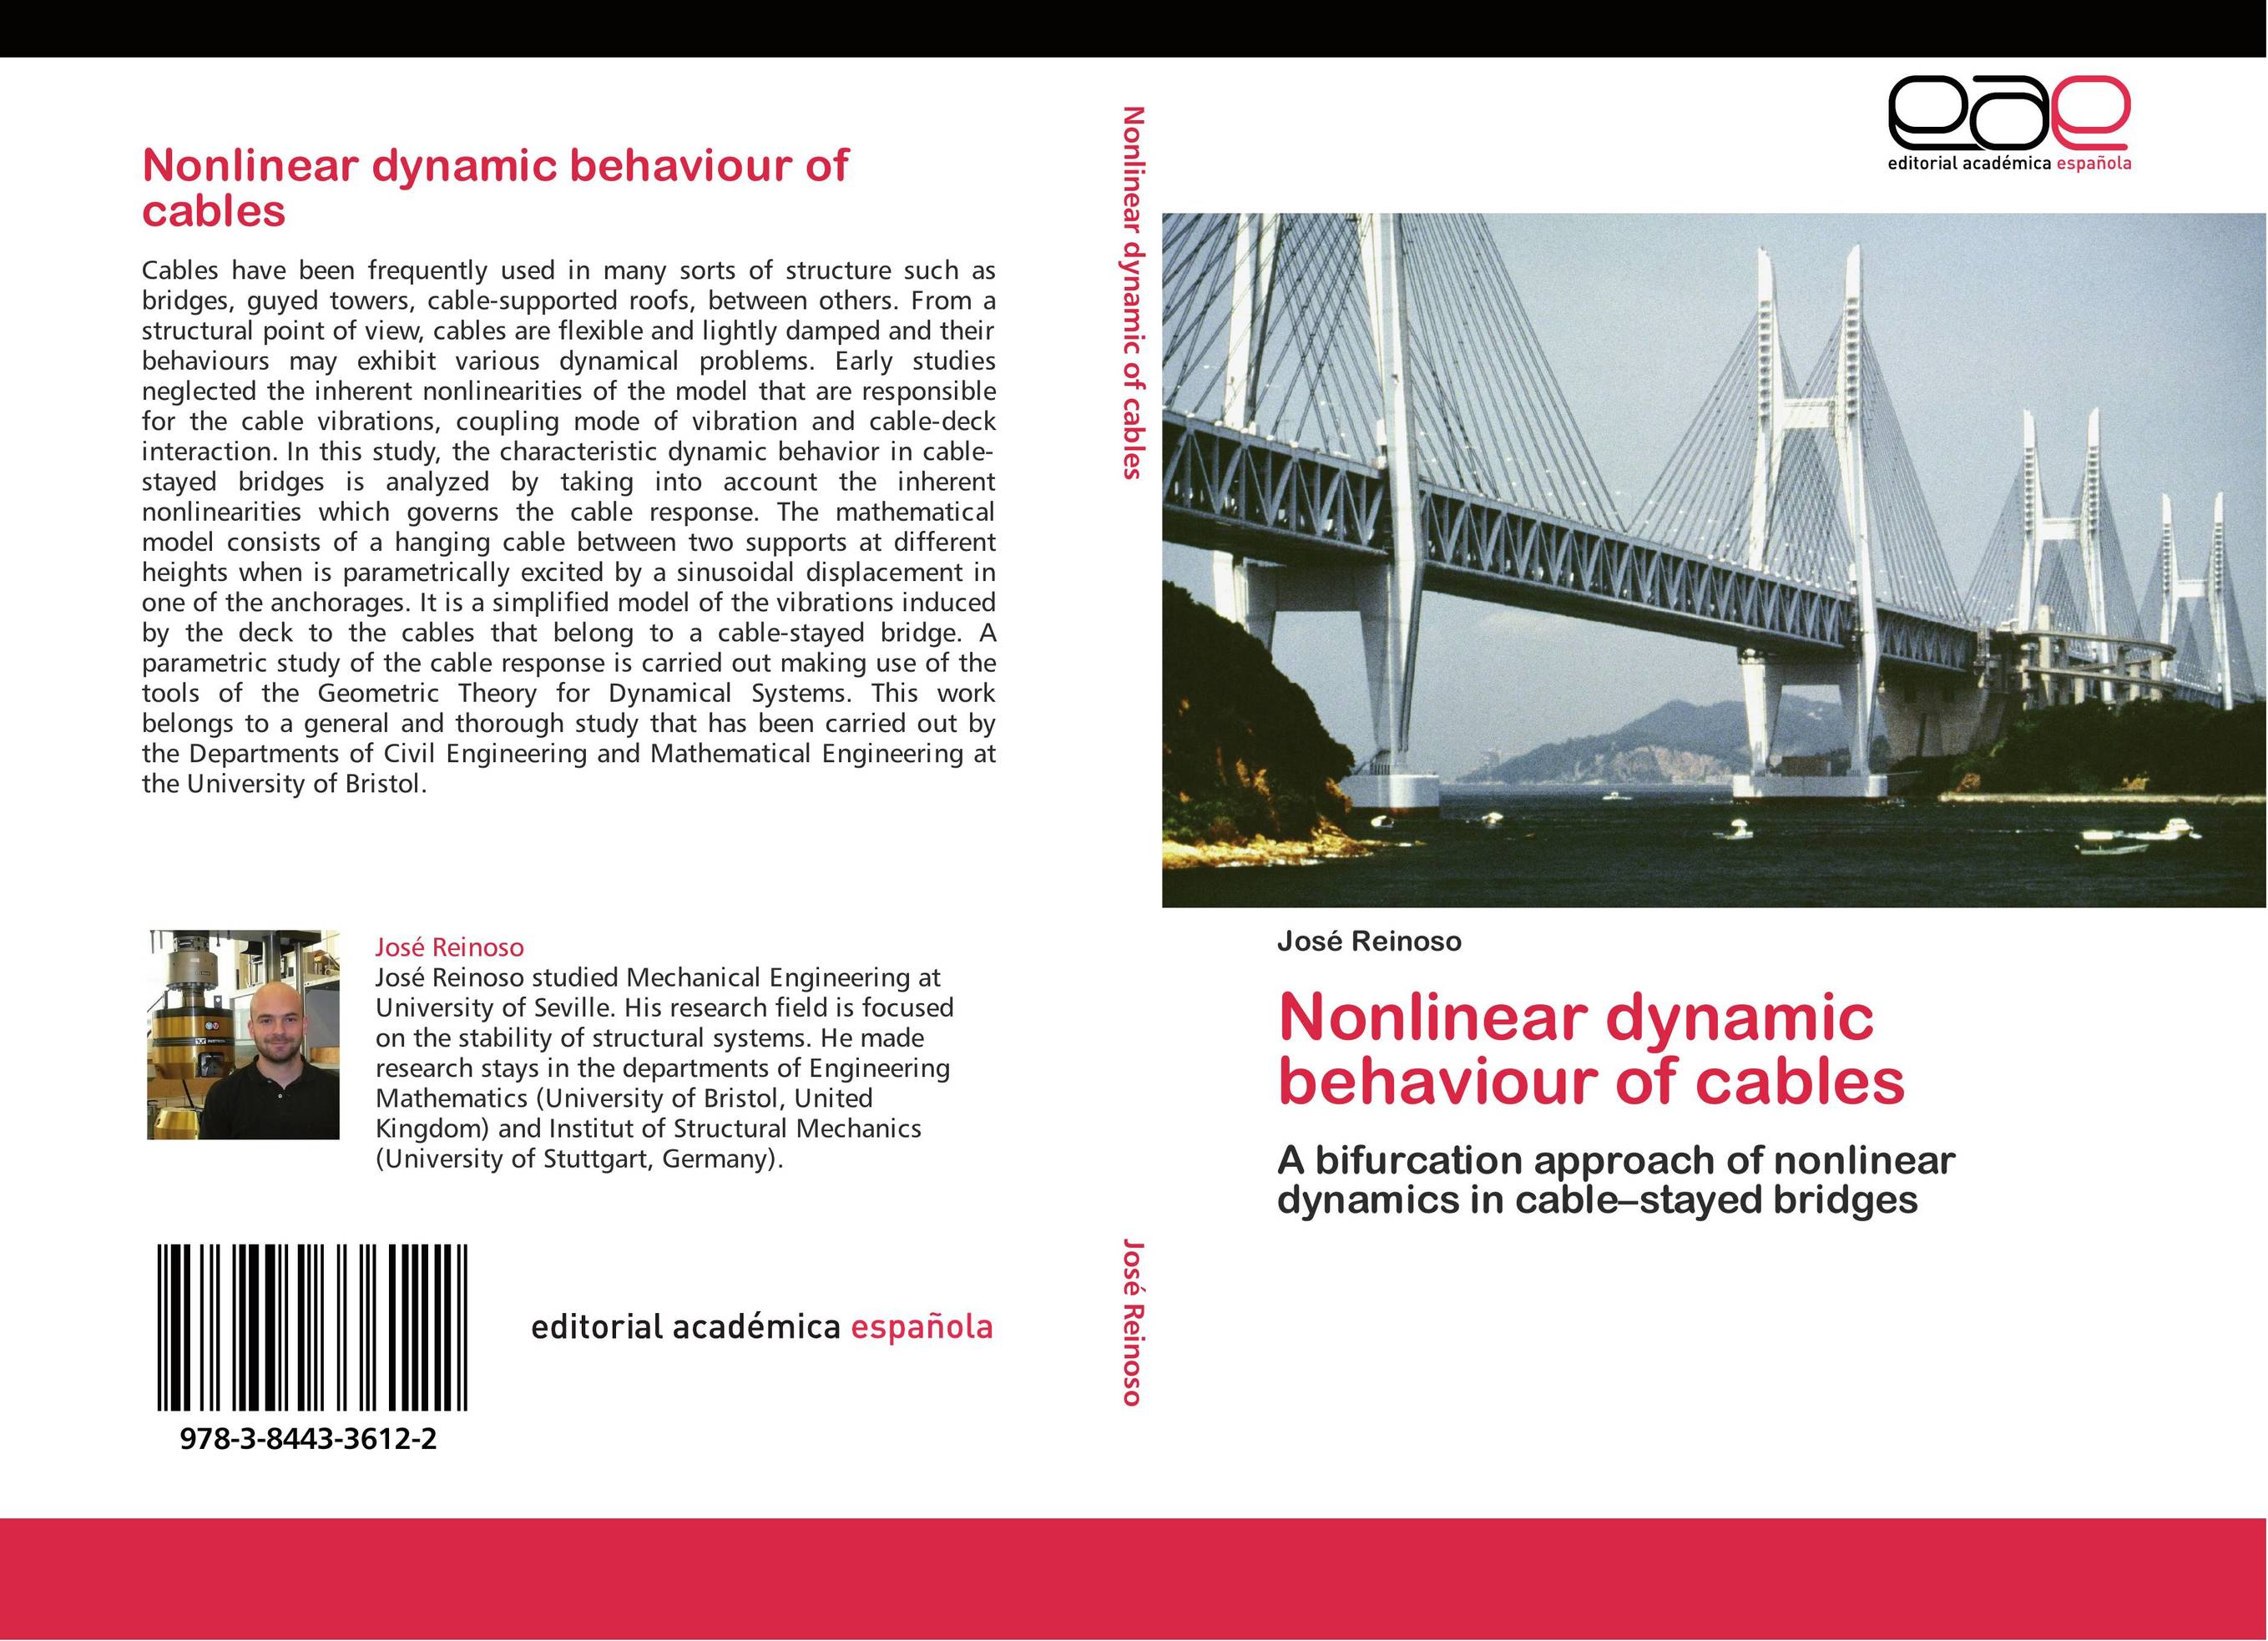 Nonlinear dynamic behaviour of cables